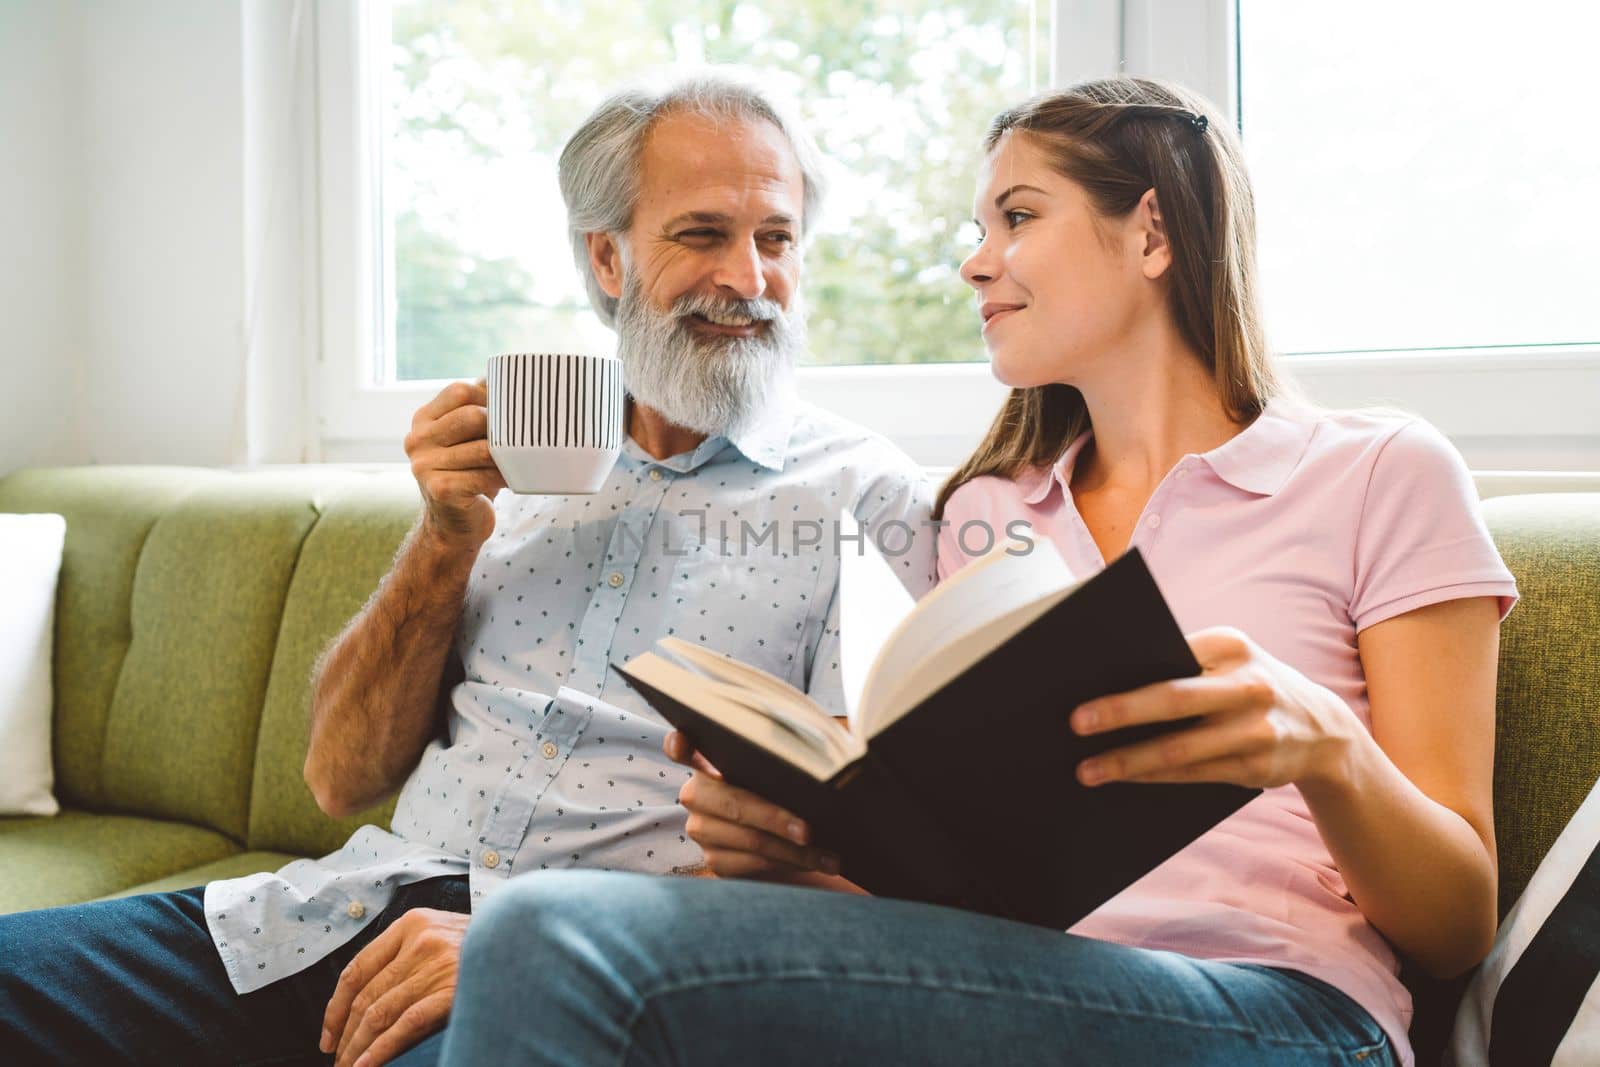 Smiling senior man enjoys spending his time together with his granddaughter, young woman sitting next to him holding a book by VisualProductions